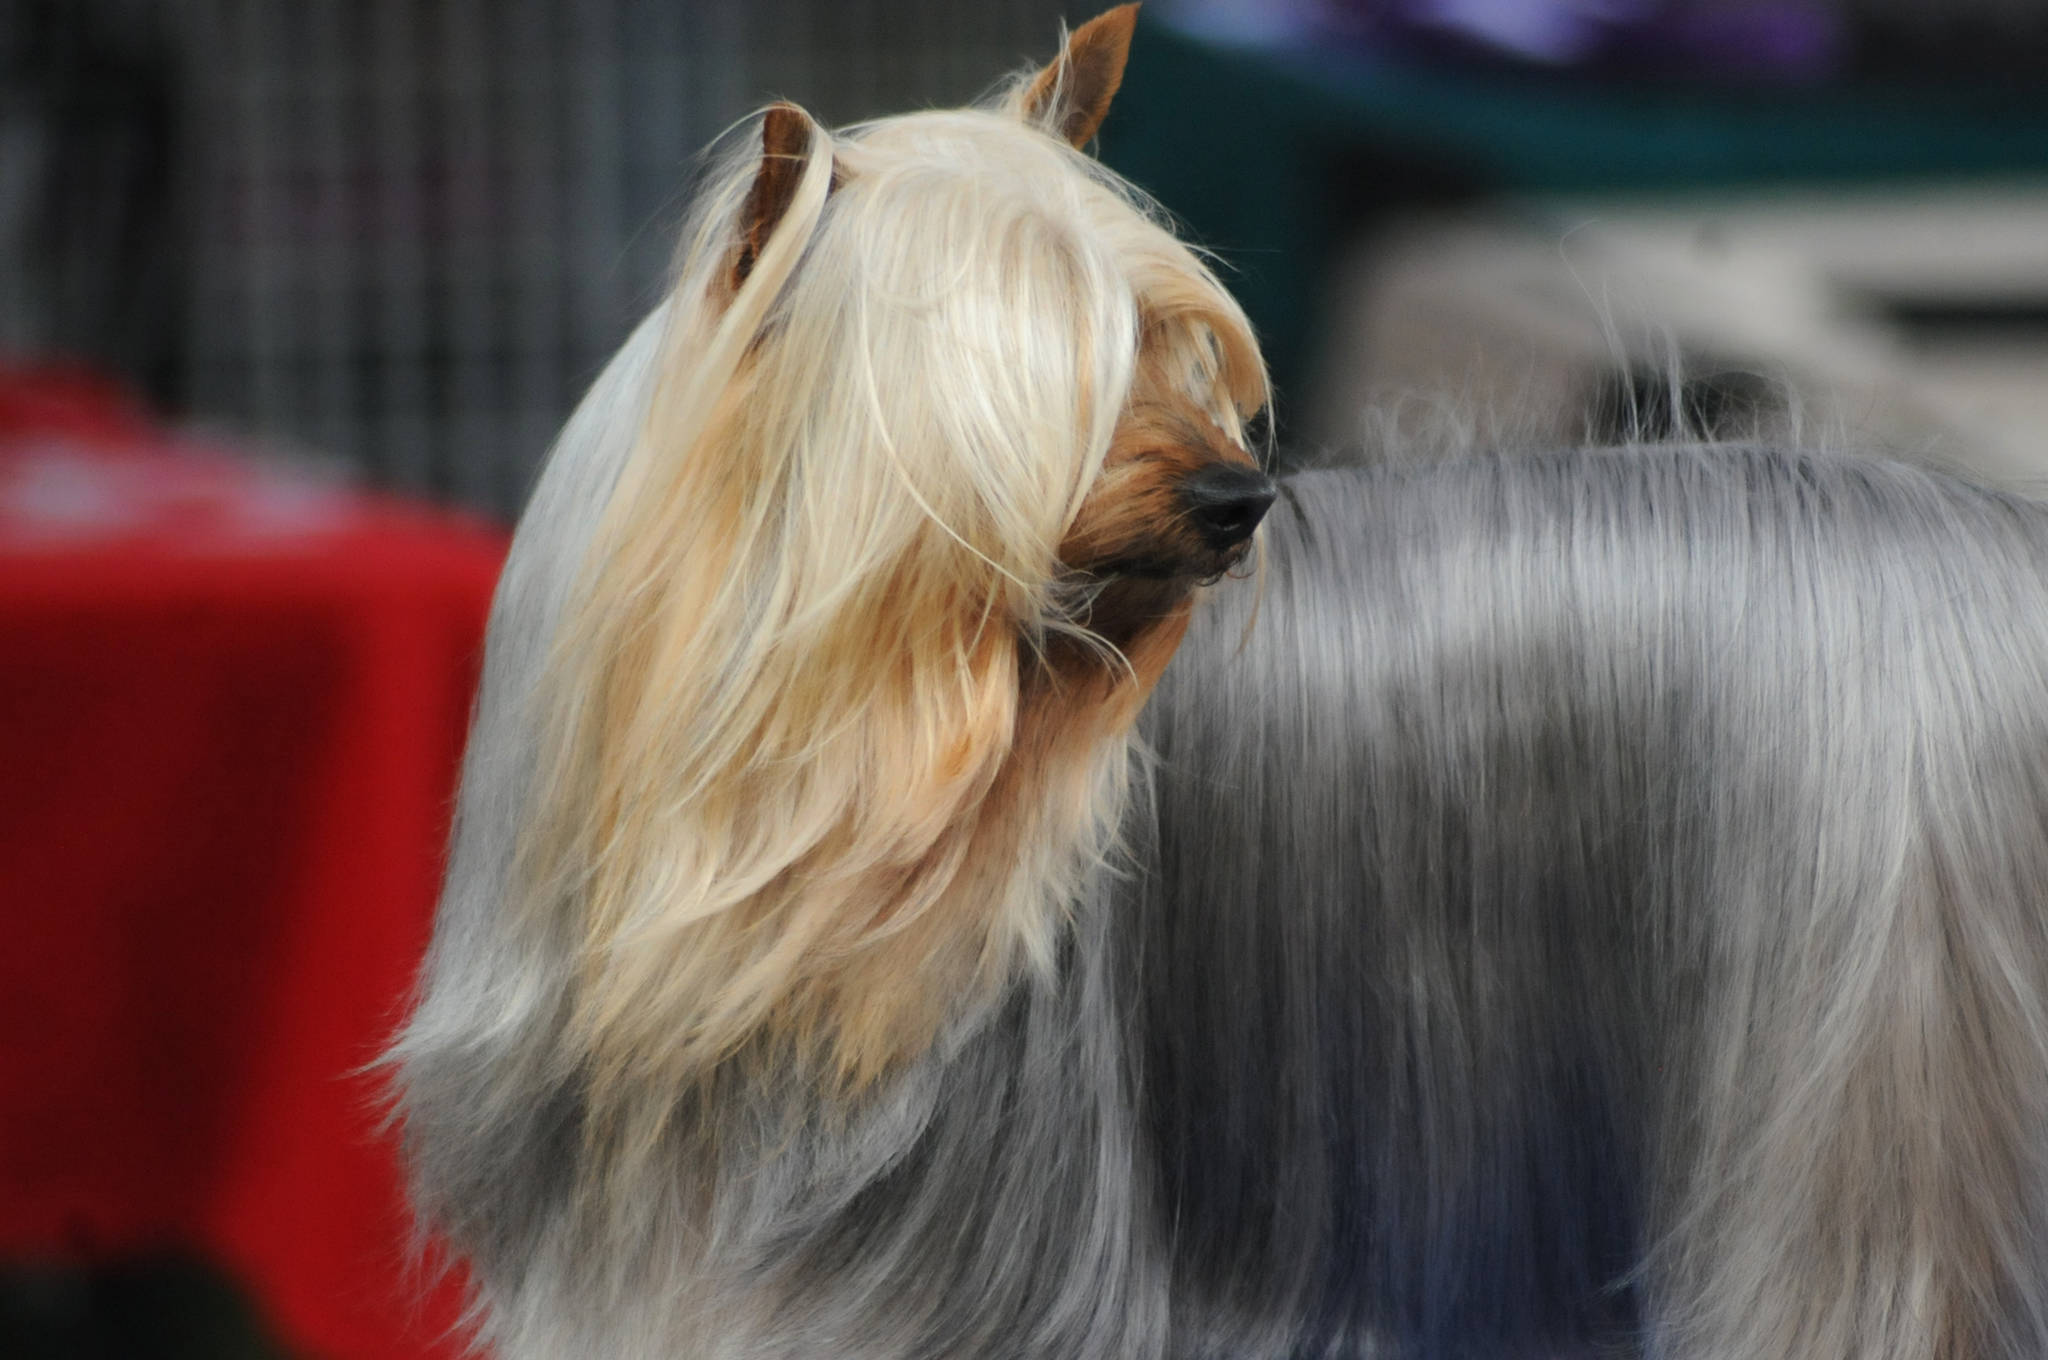 A dog takes a glance around while being groomed at the Kenai Kennel Club’s annual dog show, obedience and agility trials on Saturday, July 14, 2018 in Soldotna, Alaska. Dog owners come from all over the state to take part in the events each year. (Photo by Elizabeth Earl/Peninsula Clarion)